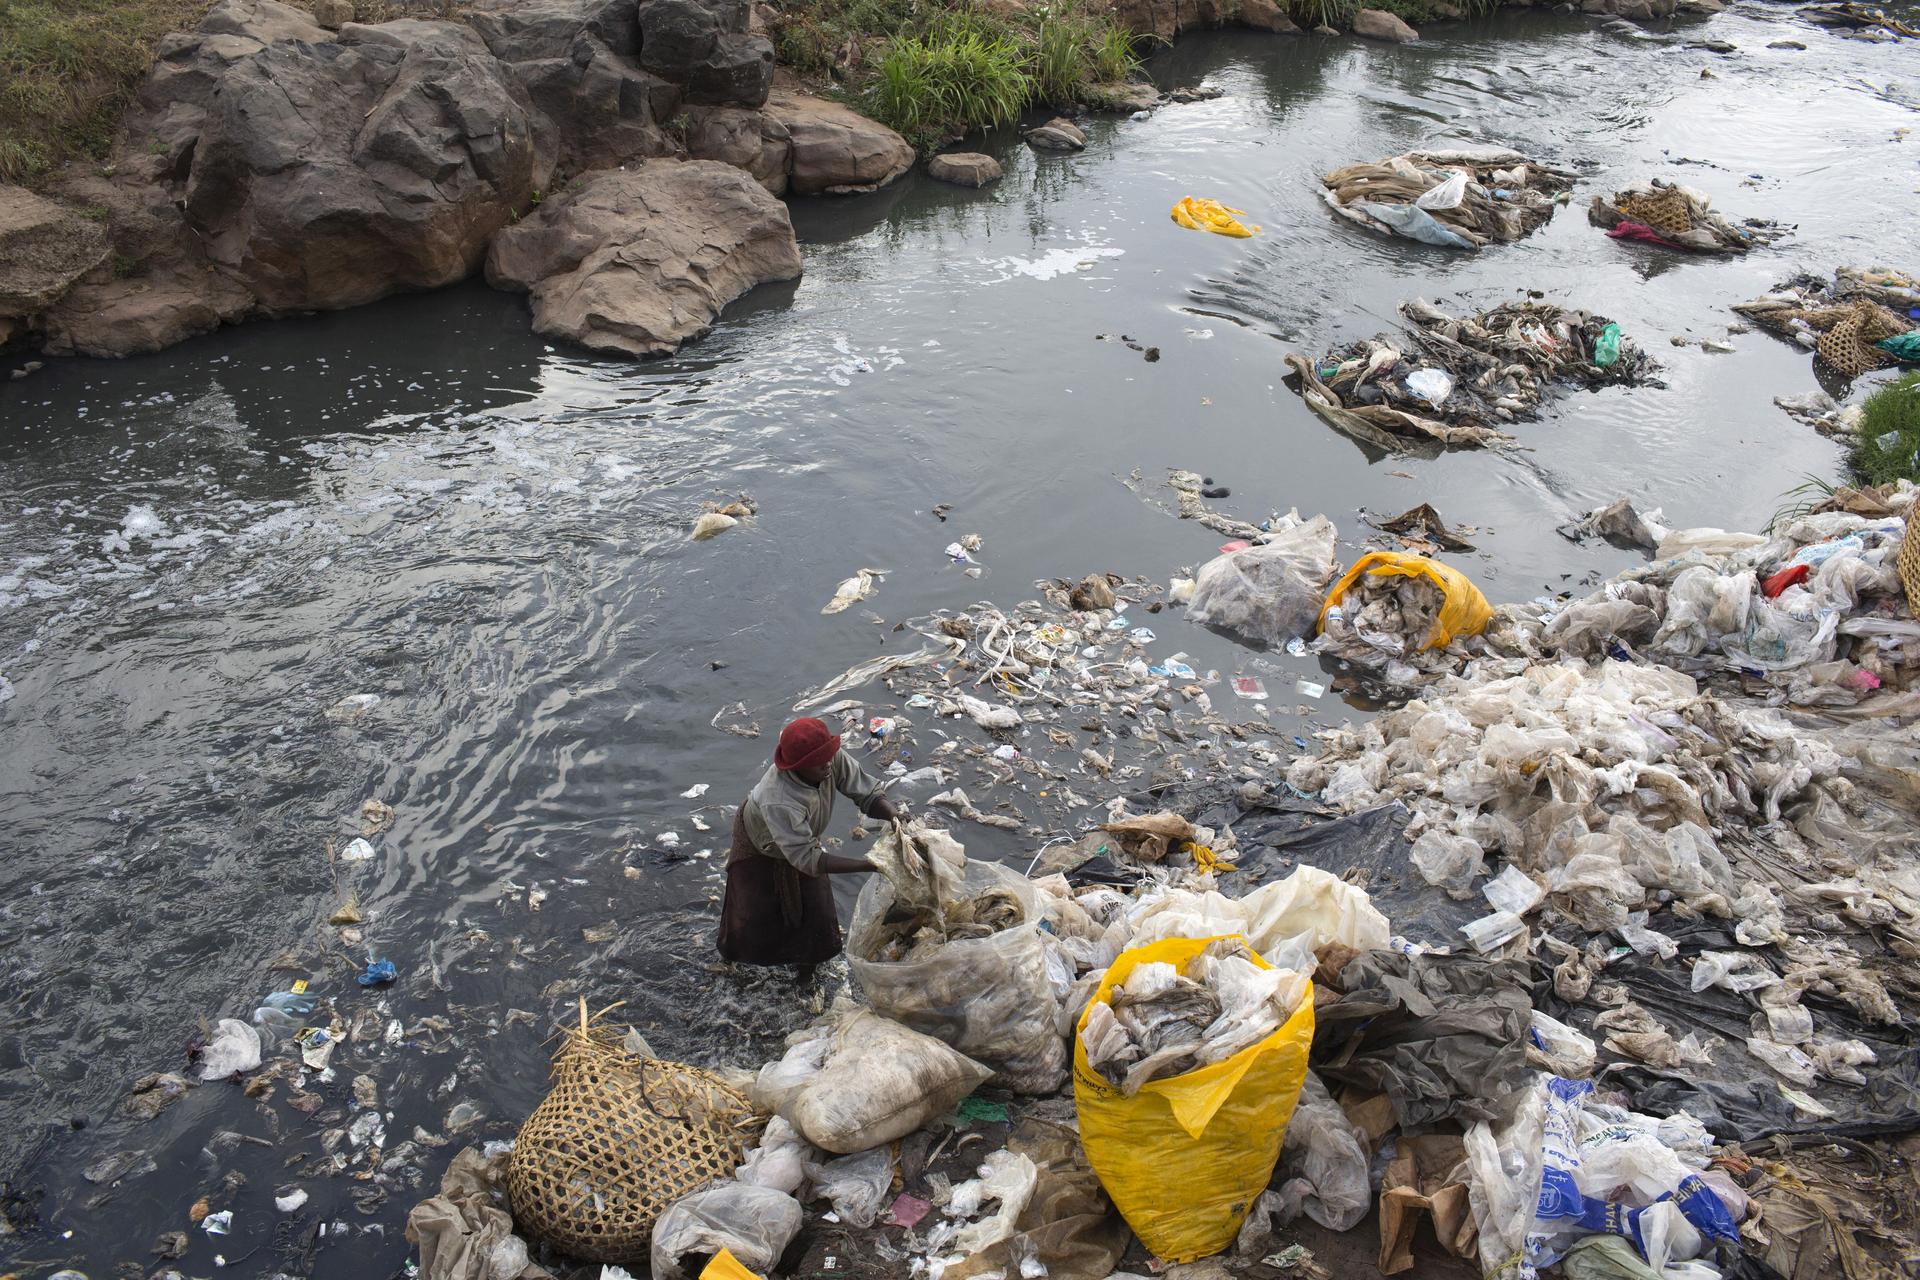 A woman recycles plastic bags from a river near the Dondora dumpsite close to the slum of Korogocho in the capital Nairobi, Kenya, March 17, 2015